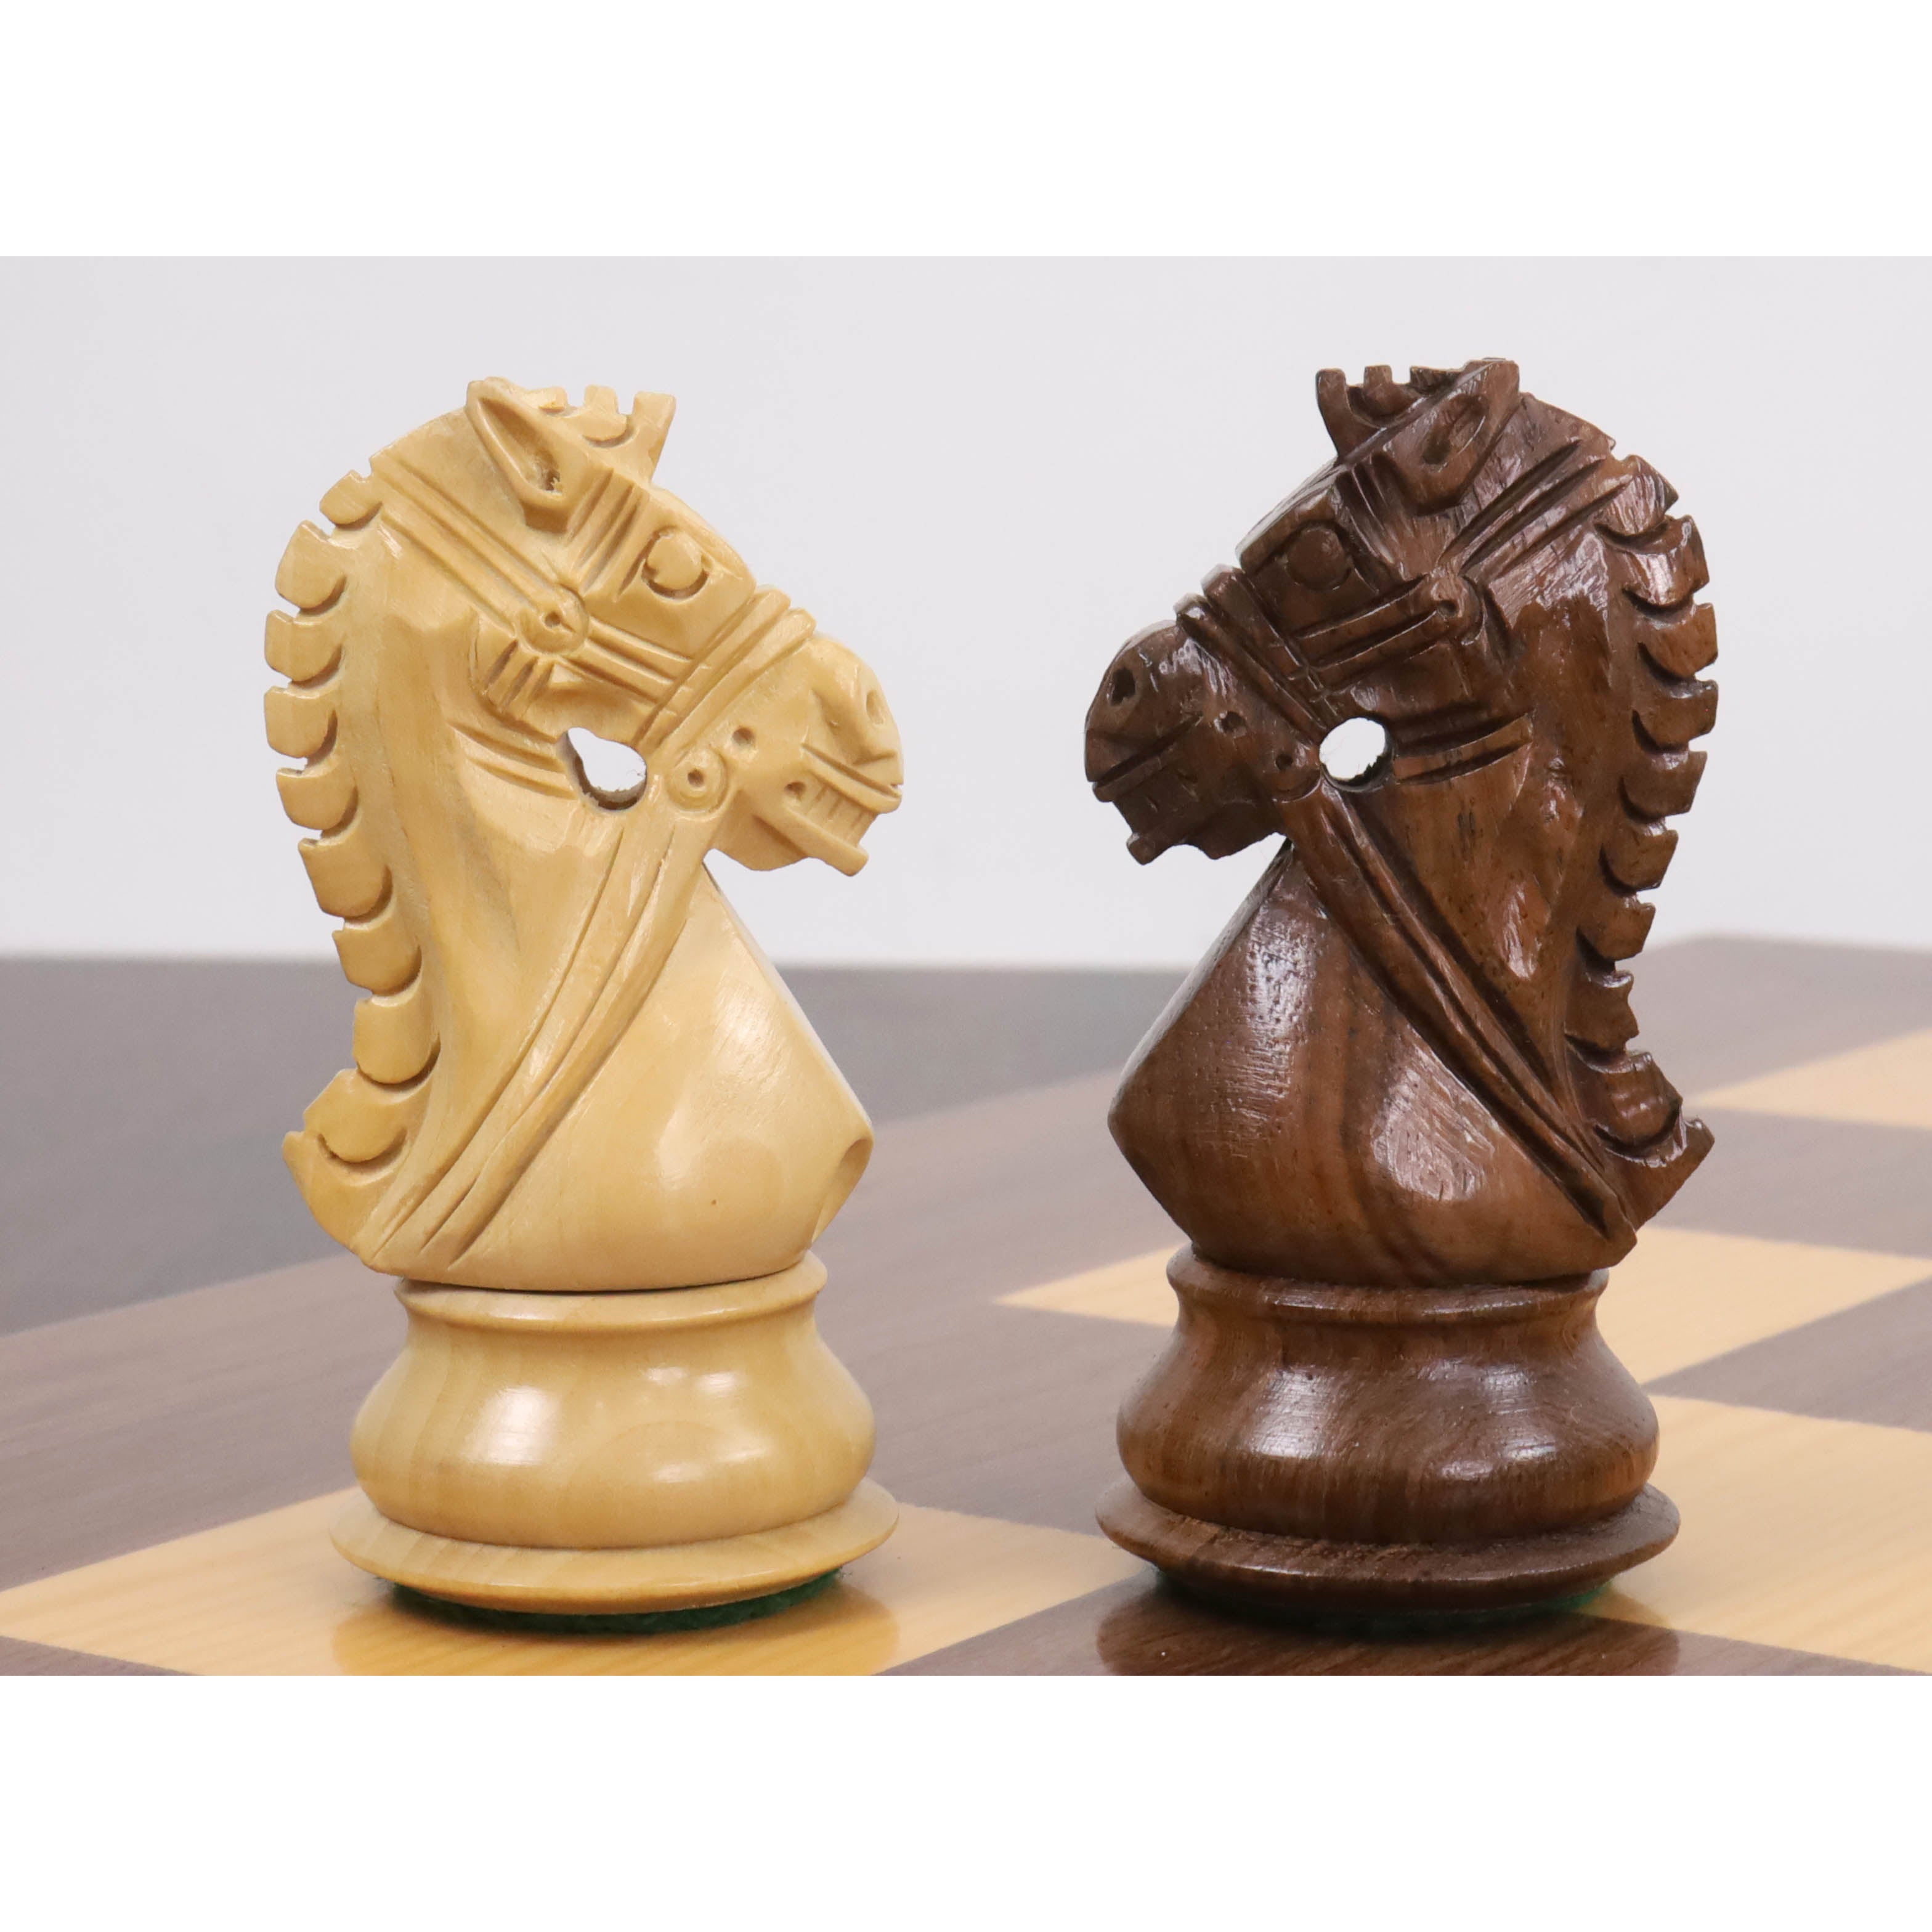 The Kings Bridle Series Complete Chess Set Boxwood & Sheesham 